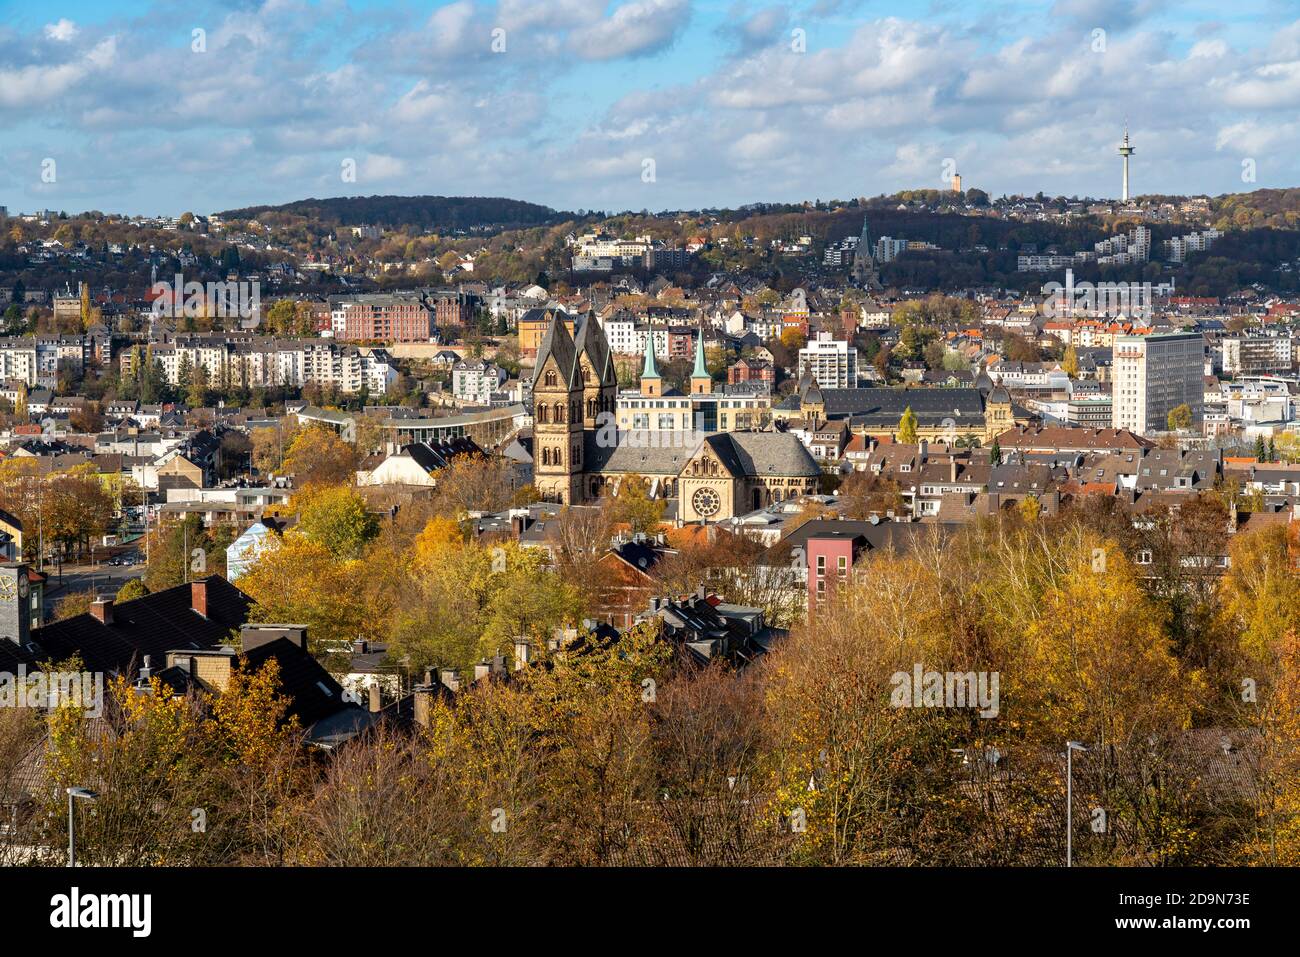 View over Wuppertal, to the north, city centre district Elberfeld, church St. Suitbertus, basilica St. Laurentius, historic city hall, view over the n Stock Photo